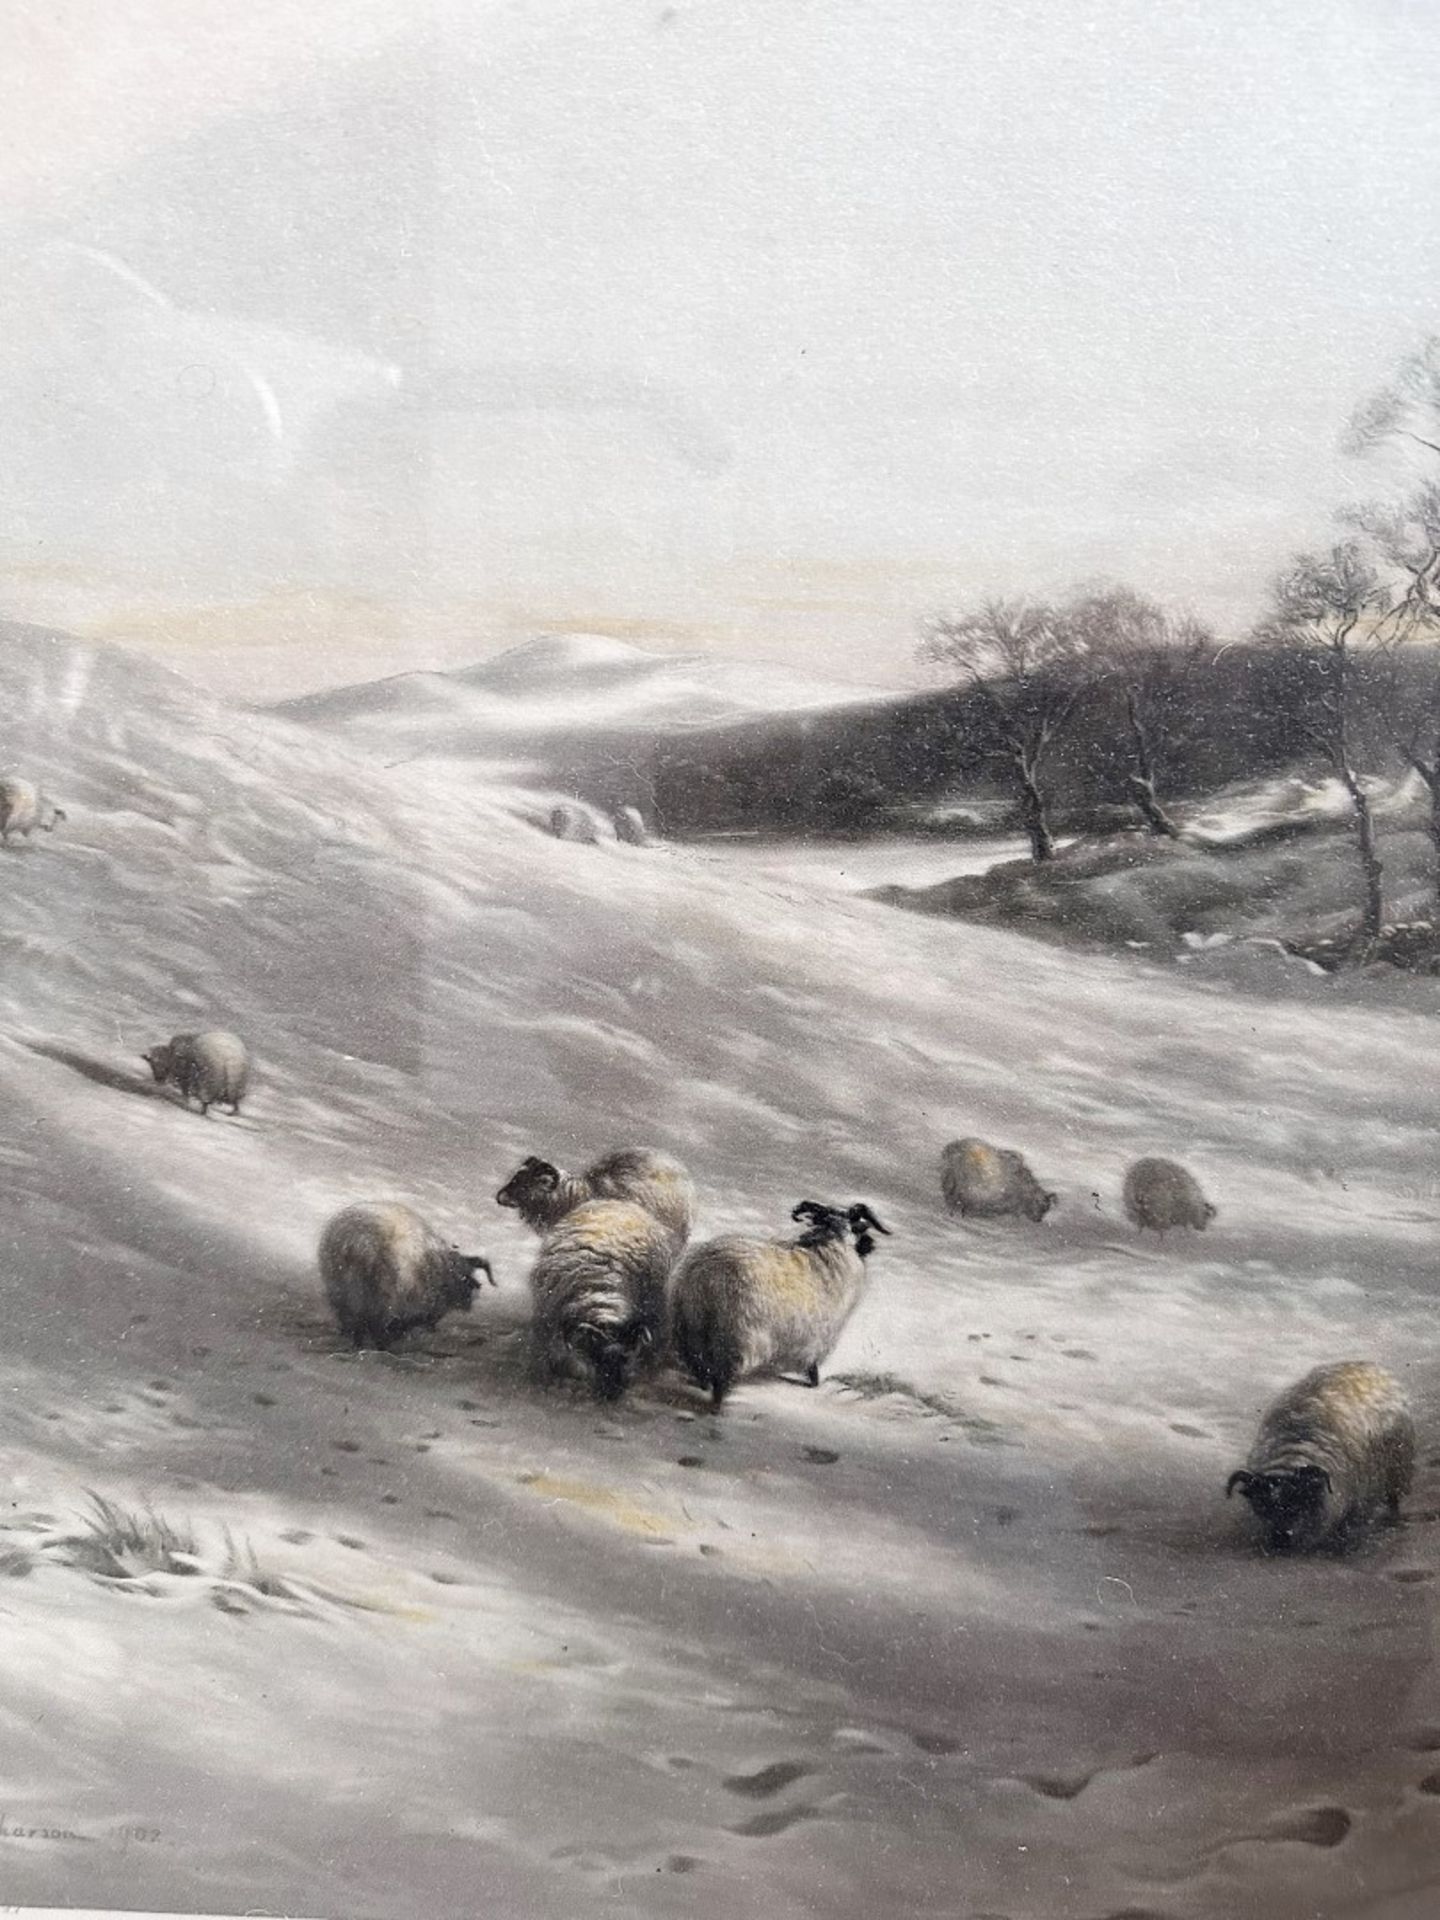 1 x JOSEPH FARQUHARSON (1846-19350) "Through The Crisp Air" Mounted And Framed - Image 5 of 8